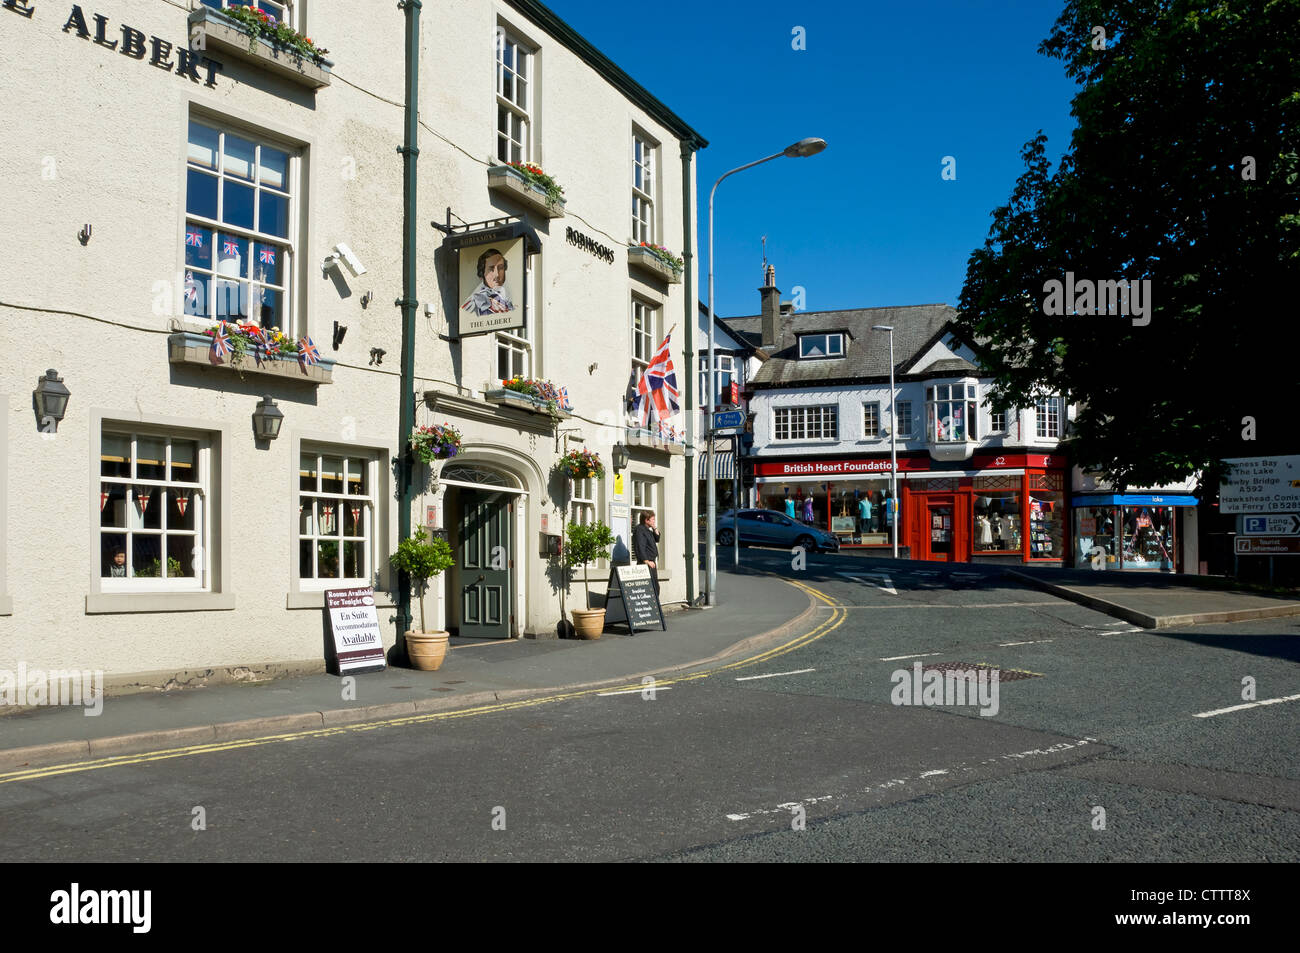 The Albert pub public house in the town centre in summer Bowness on Windermere Cumbria England UK United Kingdom GB Great Britain Stock Photo